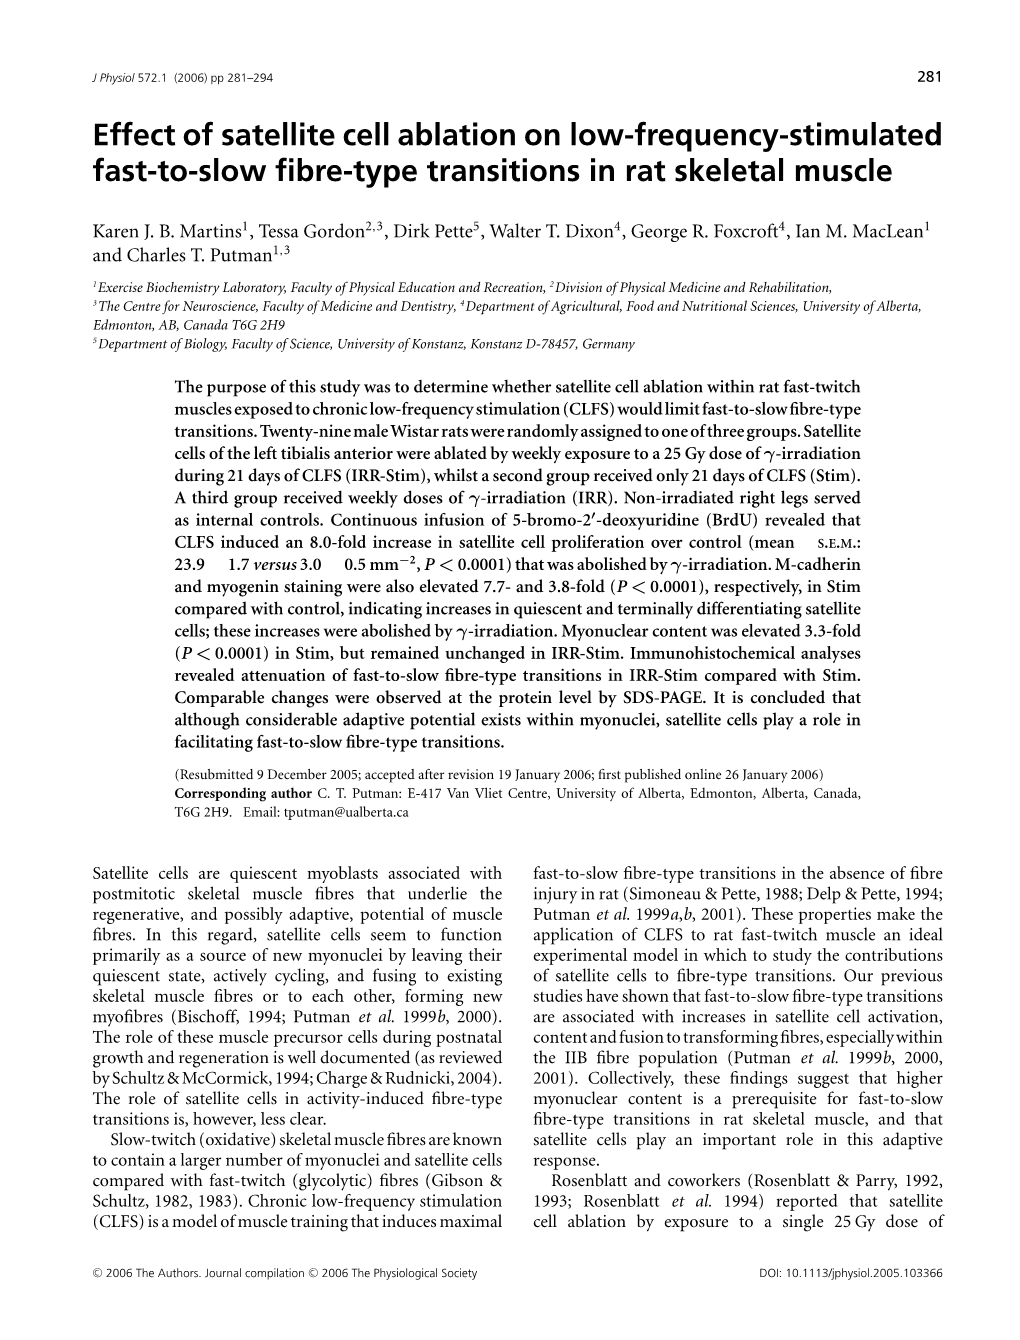 Effect of Satellite Cell Ablation on Low-Frequency-Stimulated Fast-To-Slow ﬁbre-Type Transitions in Rat Skeletal Muscle